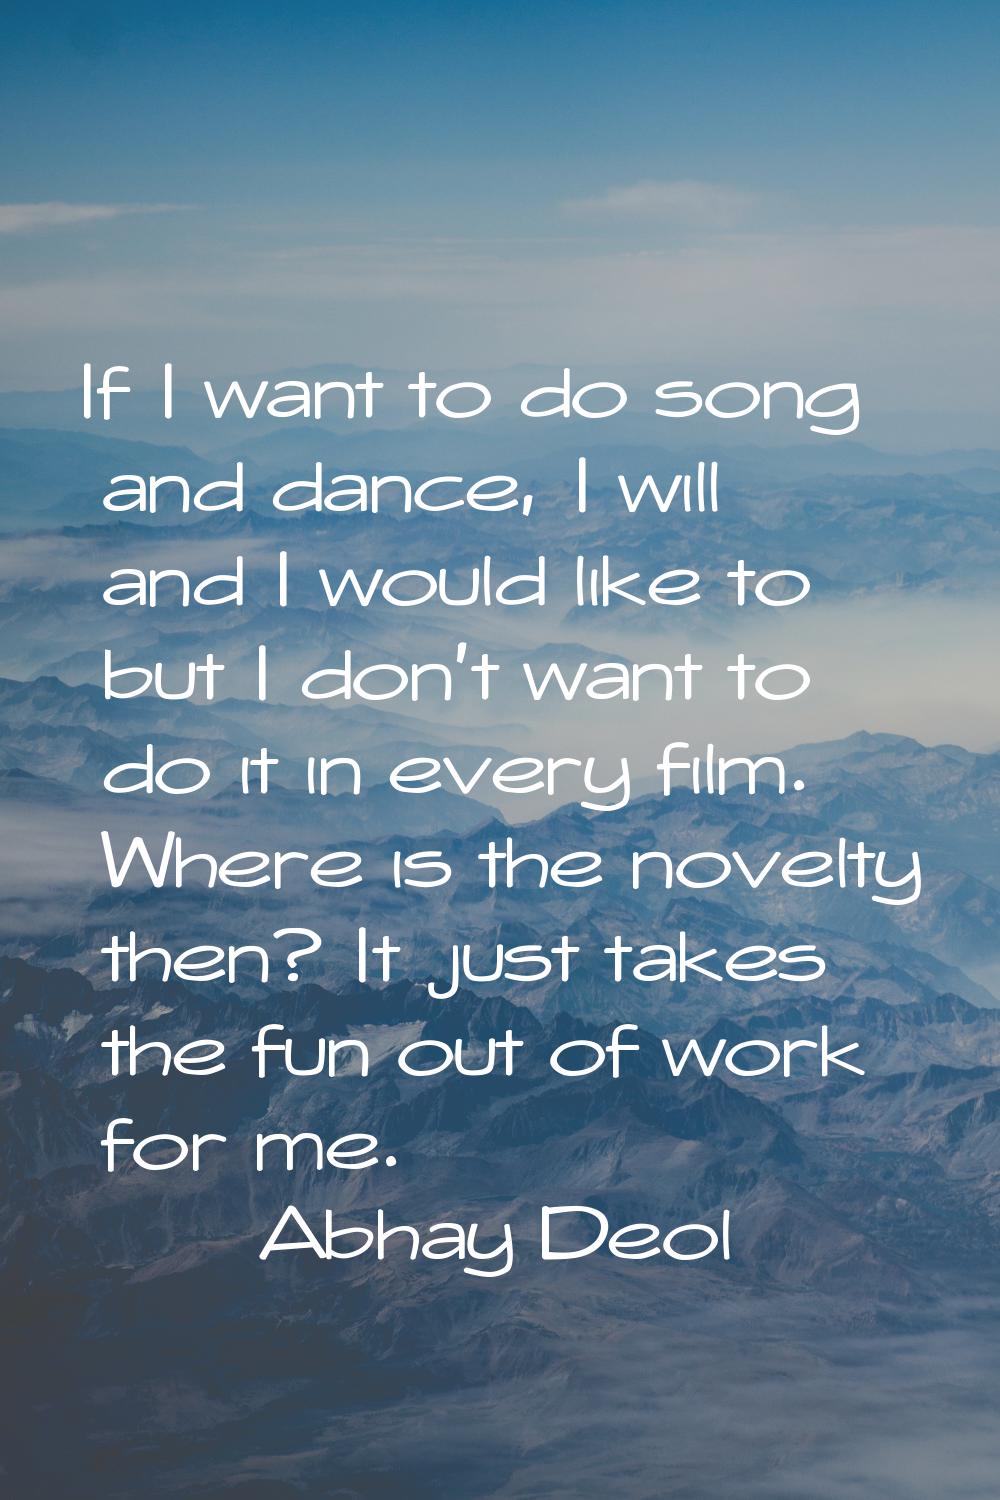 If I want to do song and dance, I will and I would like to but I don't want to do it in every film.